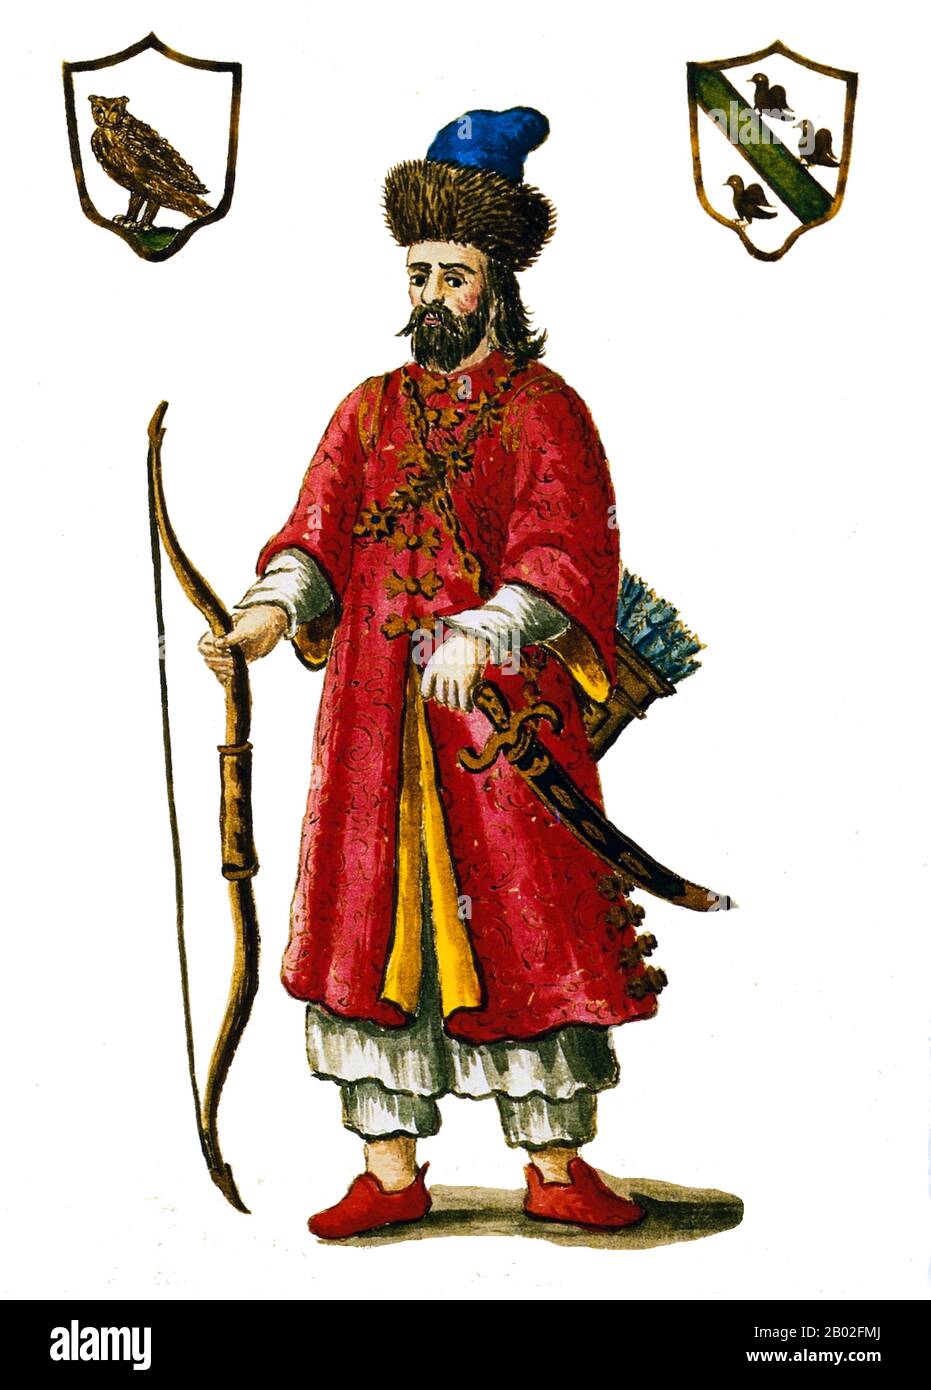 Probably born in Venice around 1254 CE, Marco Polo was raised by his aunt and uncle after his mother died. His father, Niccolo, was a Venetian merchant who left before Marco was born to trade in the Middle East. Niccolo and his brother Maffeo passed through much of Asia and met with Mongol emperor Kublai Khan who reportedly invited them to be ambassadors. In 1269, Niccolo and Maffeo returned to Venice, meeting Marco for the first time.  In 1271, Marco Polo, aged 17, with his father and his uncle, set off for Asia, travelling through Constantinople, Baghdad, Persia, Kashgar, China and Burma. Th Stock Photo